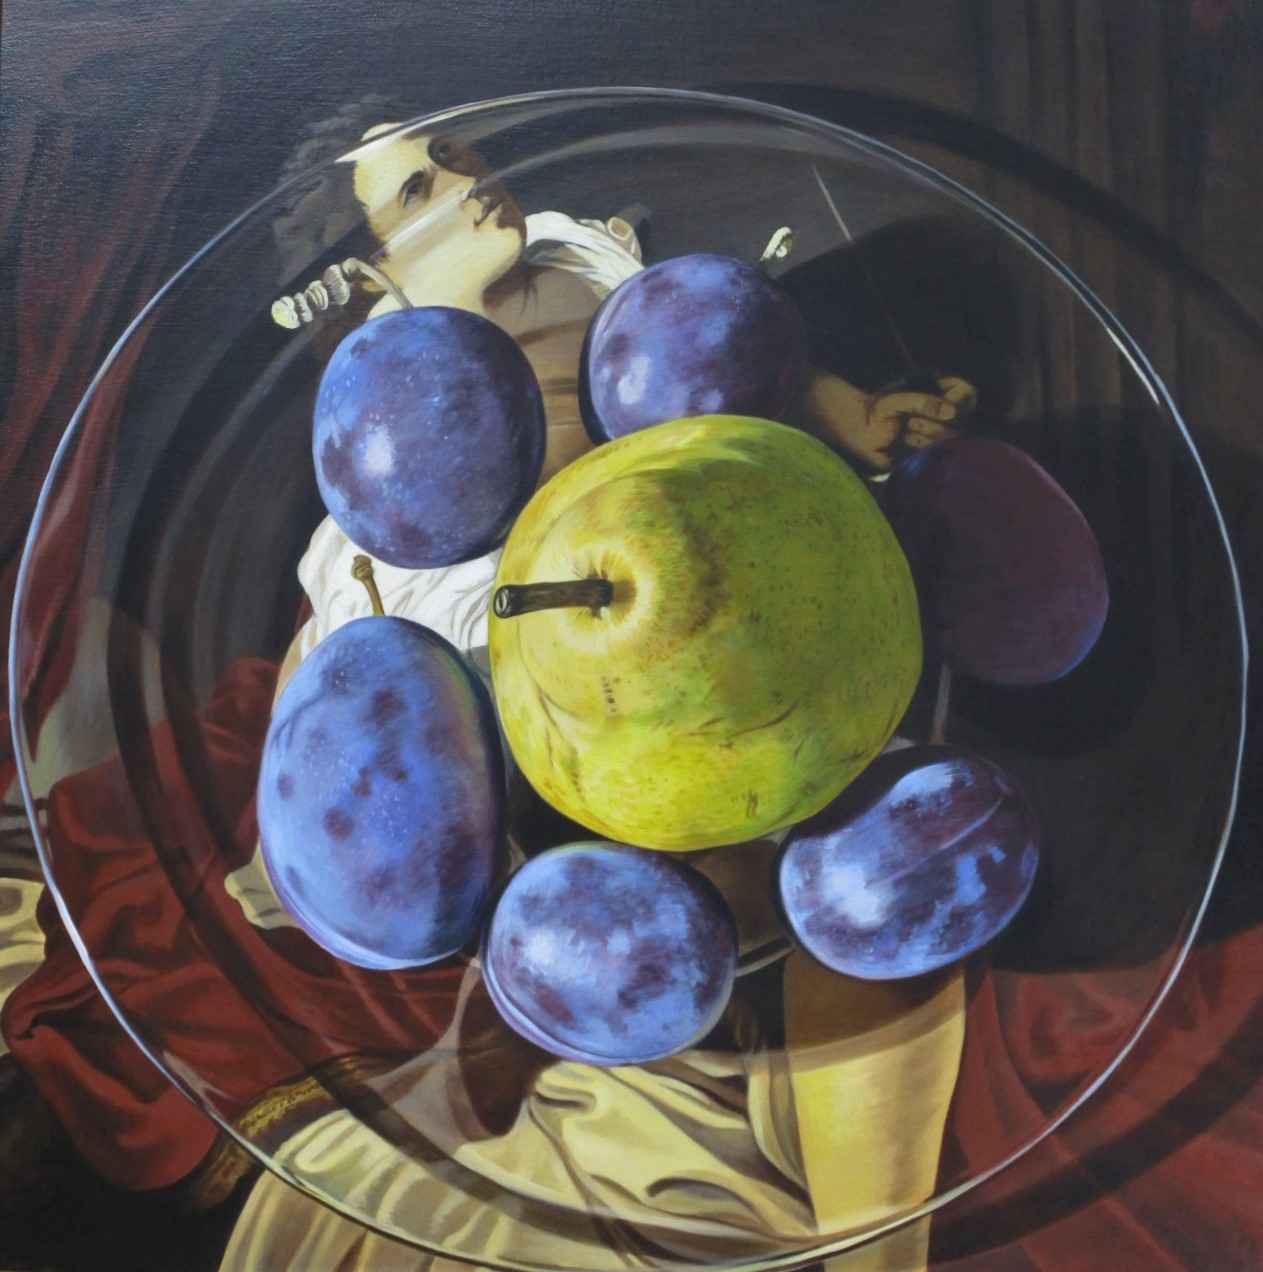 Plums and Pear, After... by  Sherrie Wolf - Masterpiece Online